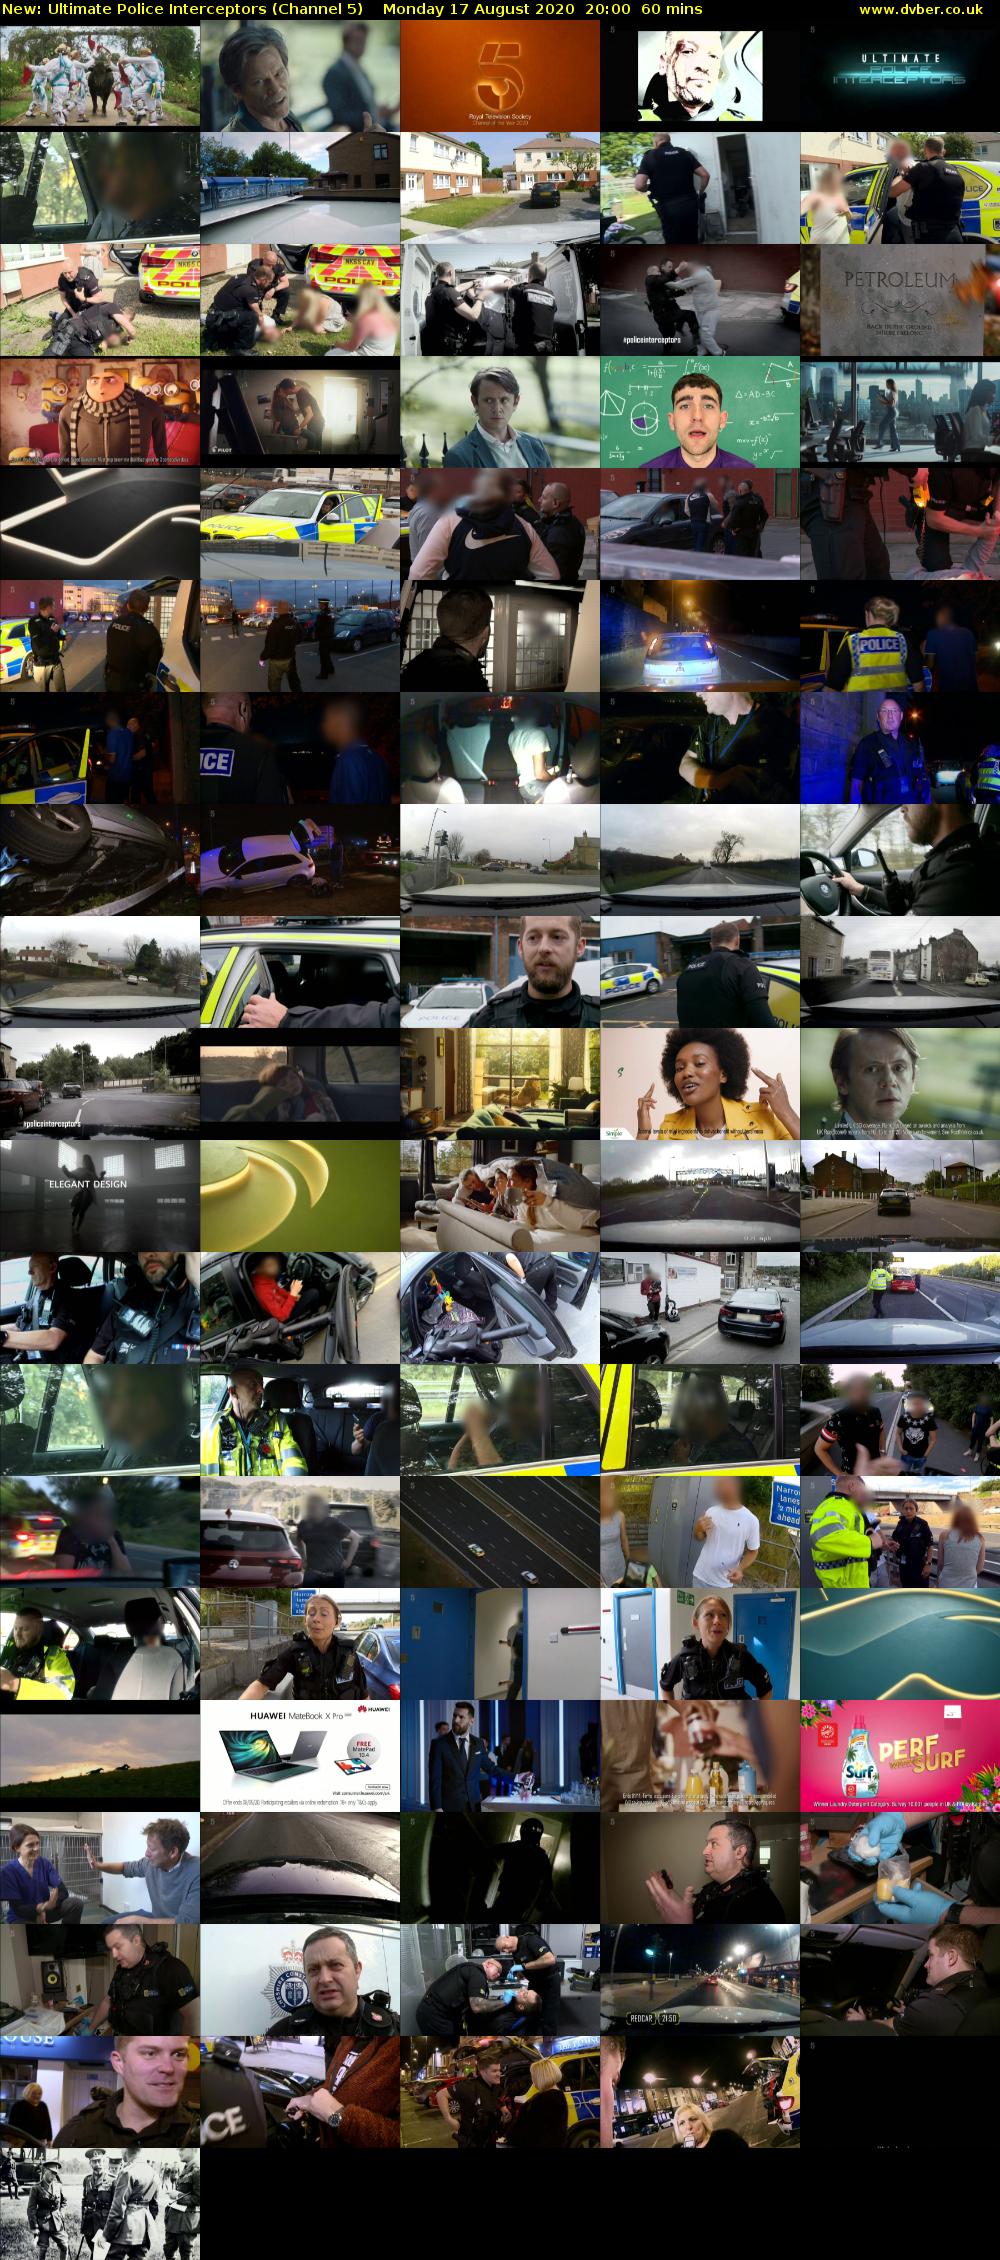 Ultimate Police Interceptors (Channel 5) Monday 17 August 2020 20:00 - 21:00